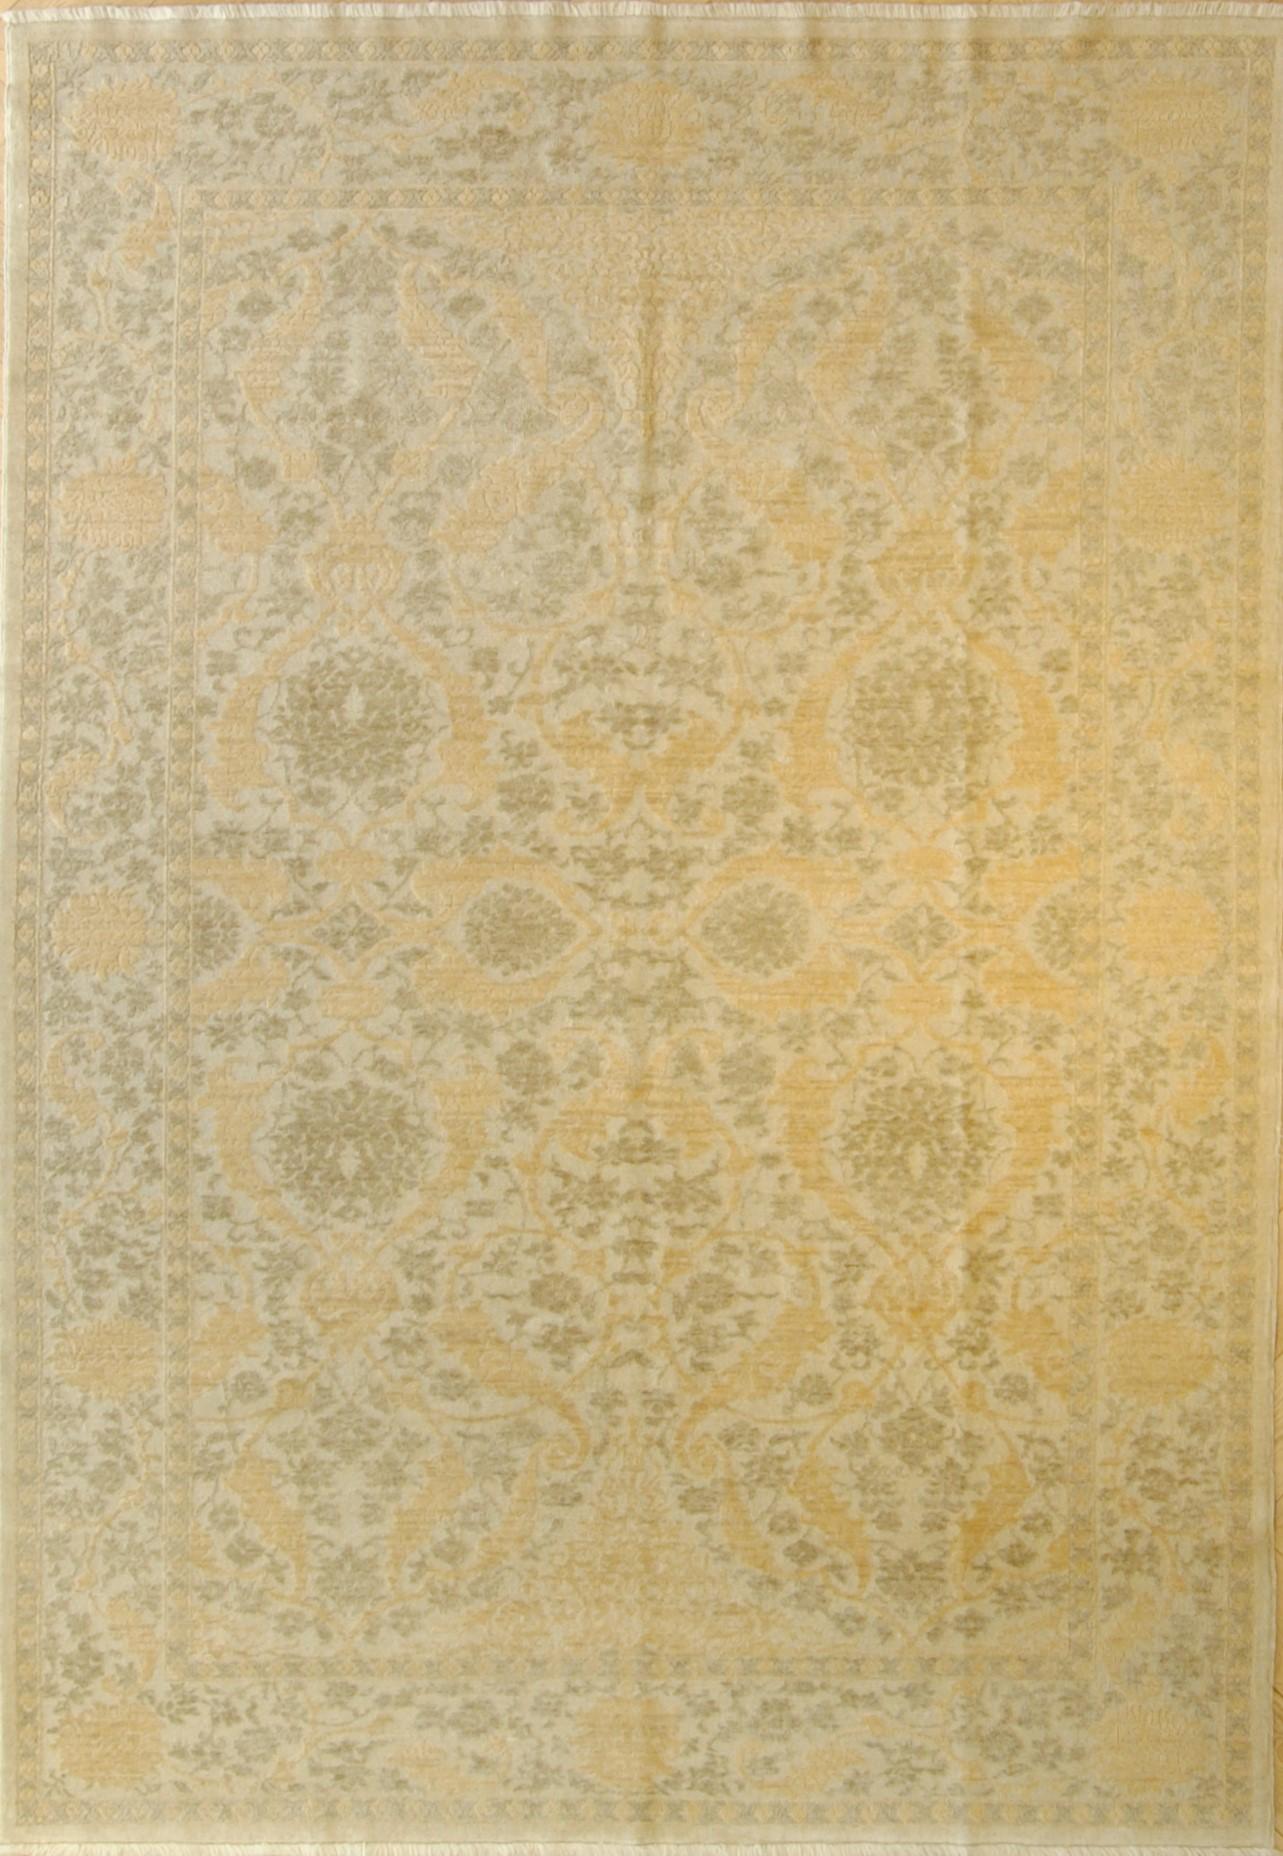 20430 Defne cm. 270 x 190 € 4.000
Defne carpets are contemporary Turkish carpets made by relief technique and hand-knotted
The decoration, inspired by the style of ancient ottoman fabrics, breaks the traditional Turkish pattern.
In contemporary